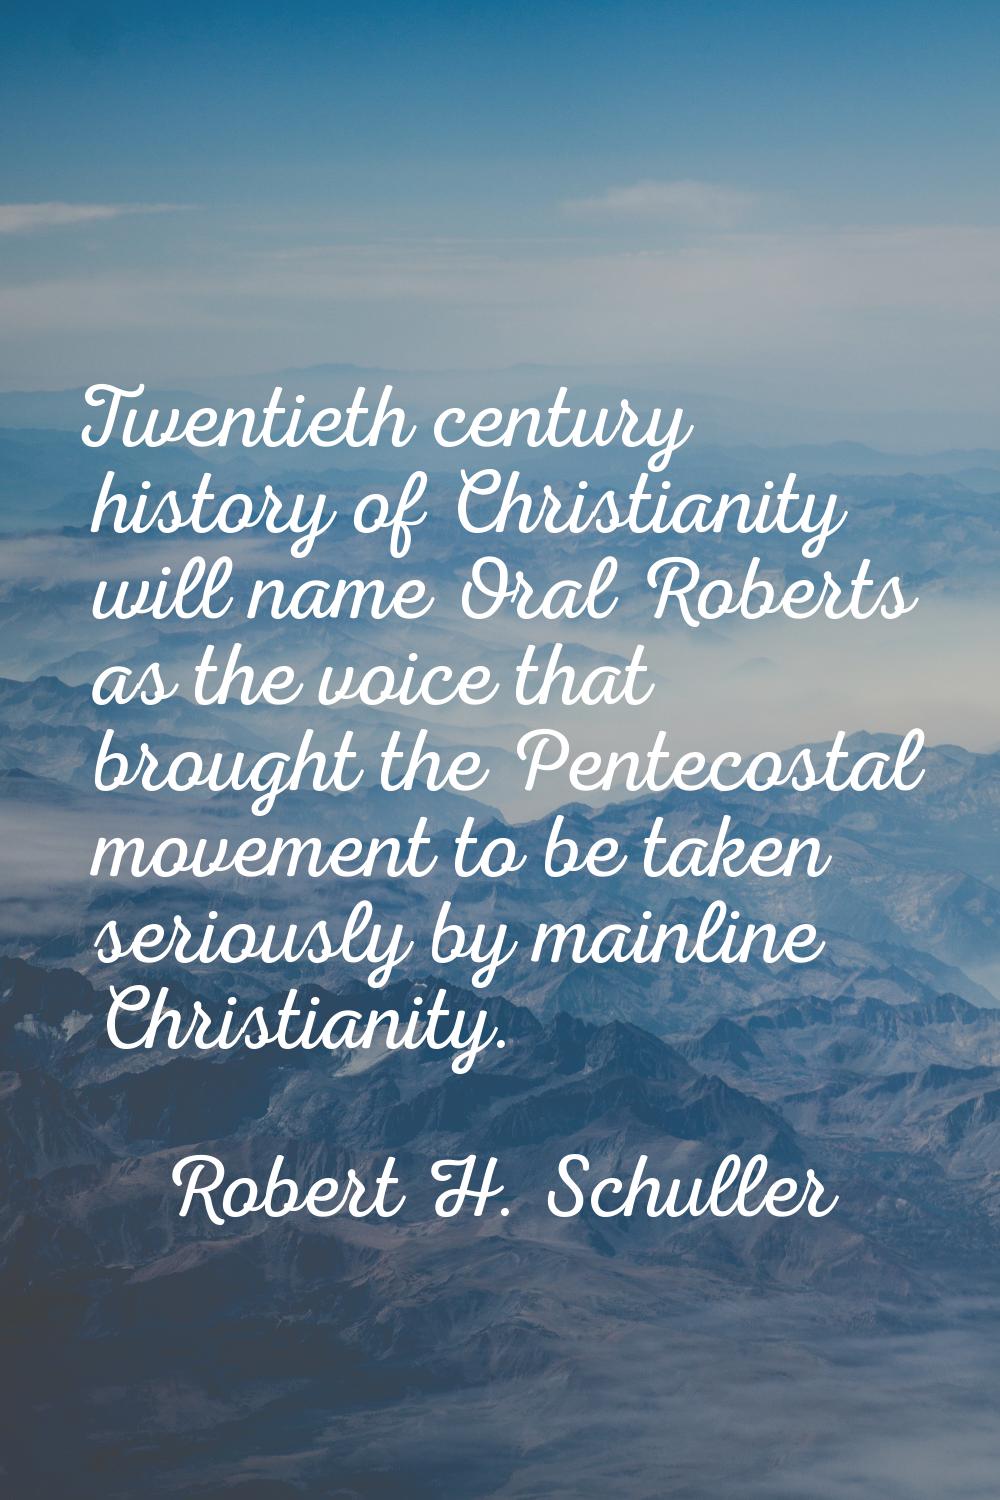 Twentieth century history of Christianity will name Oral Roberts as the voice that brought the Pent